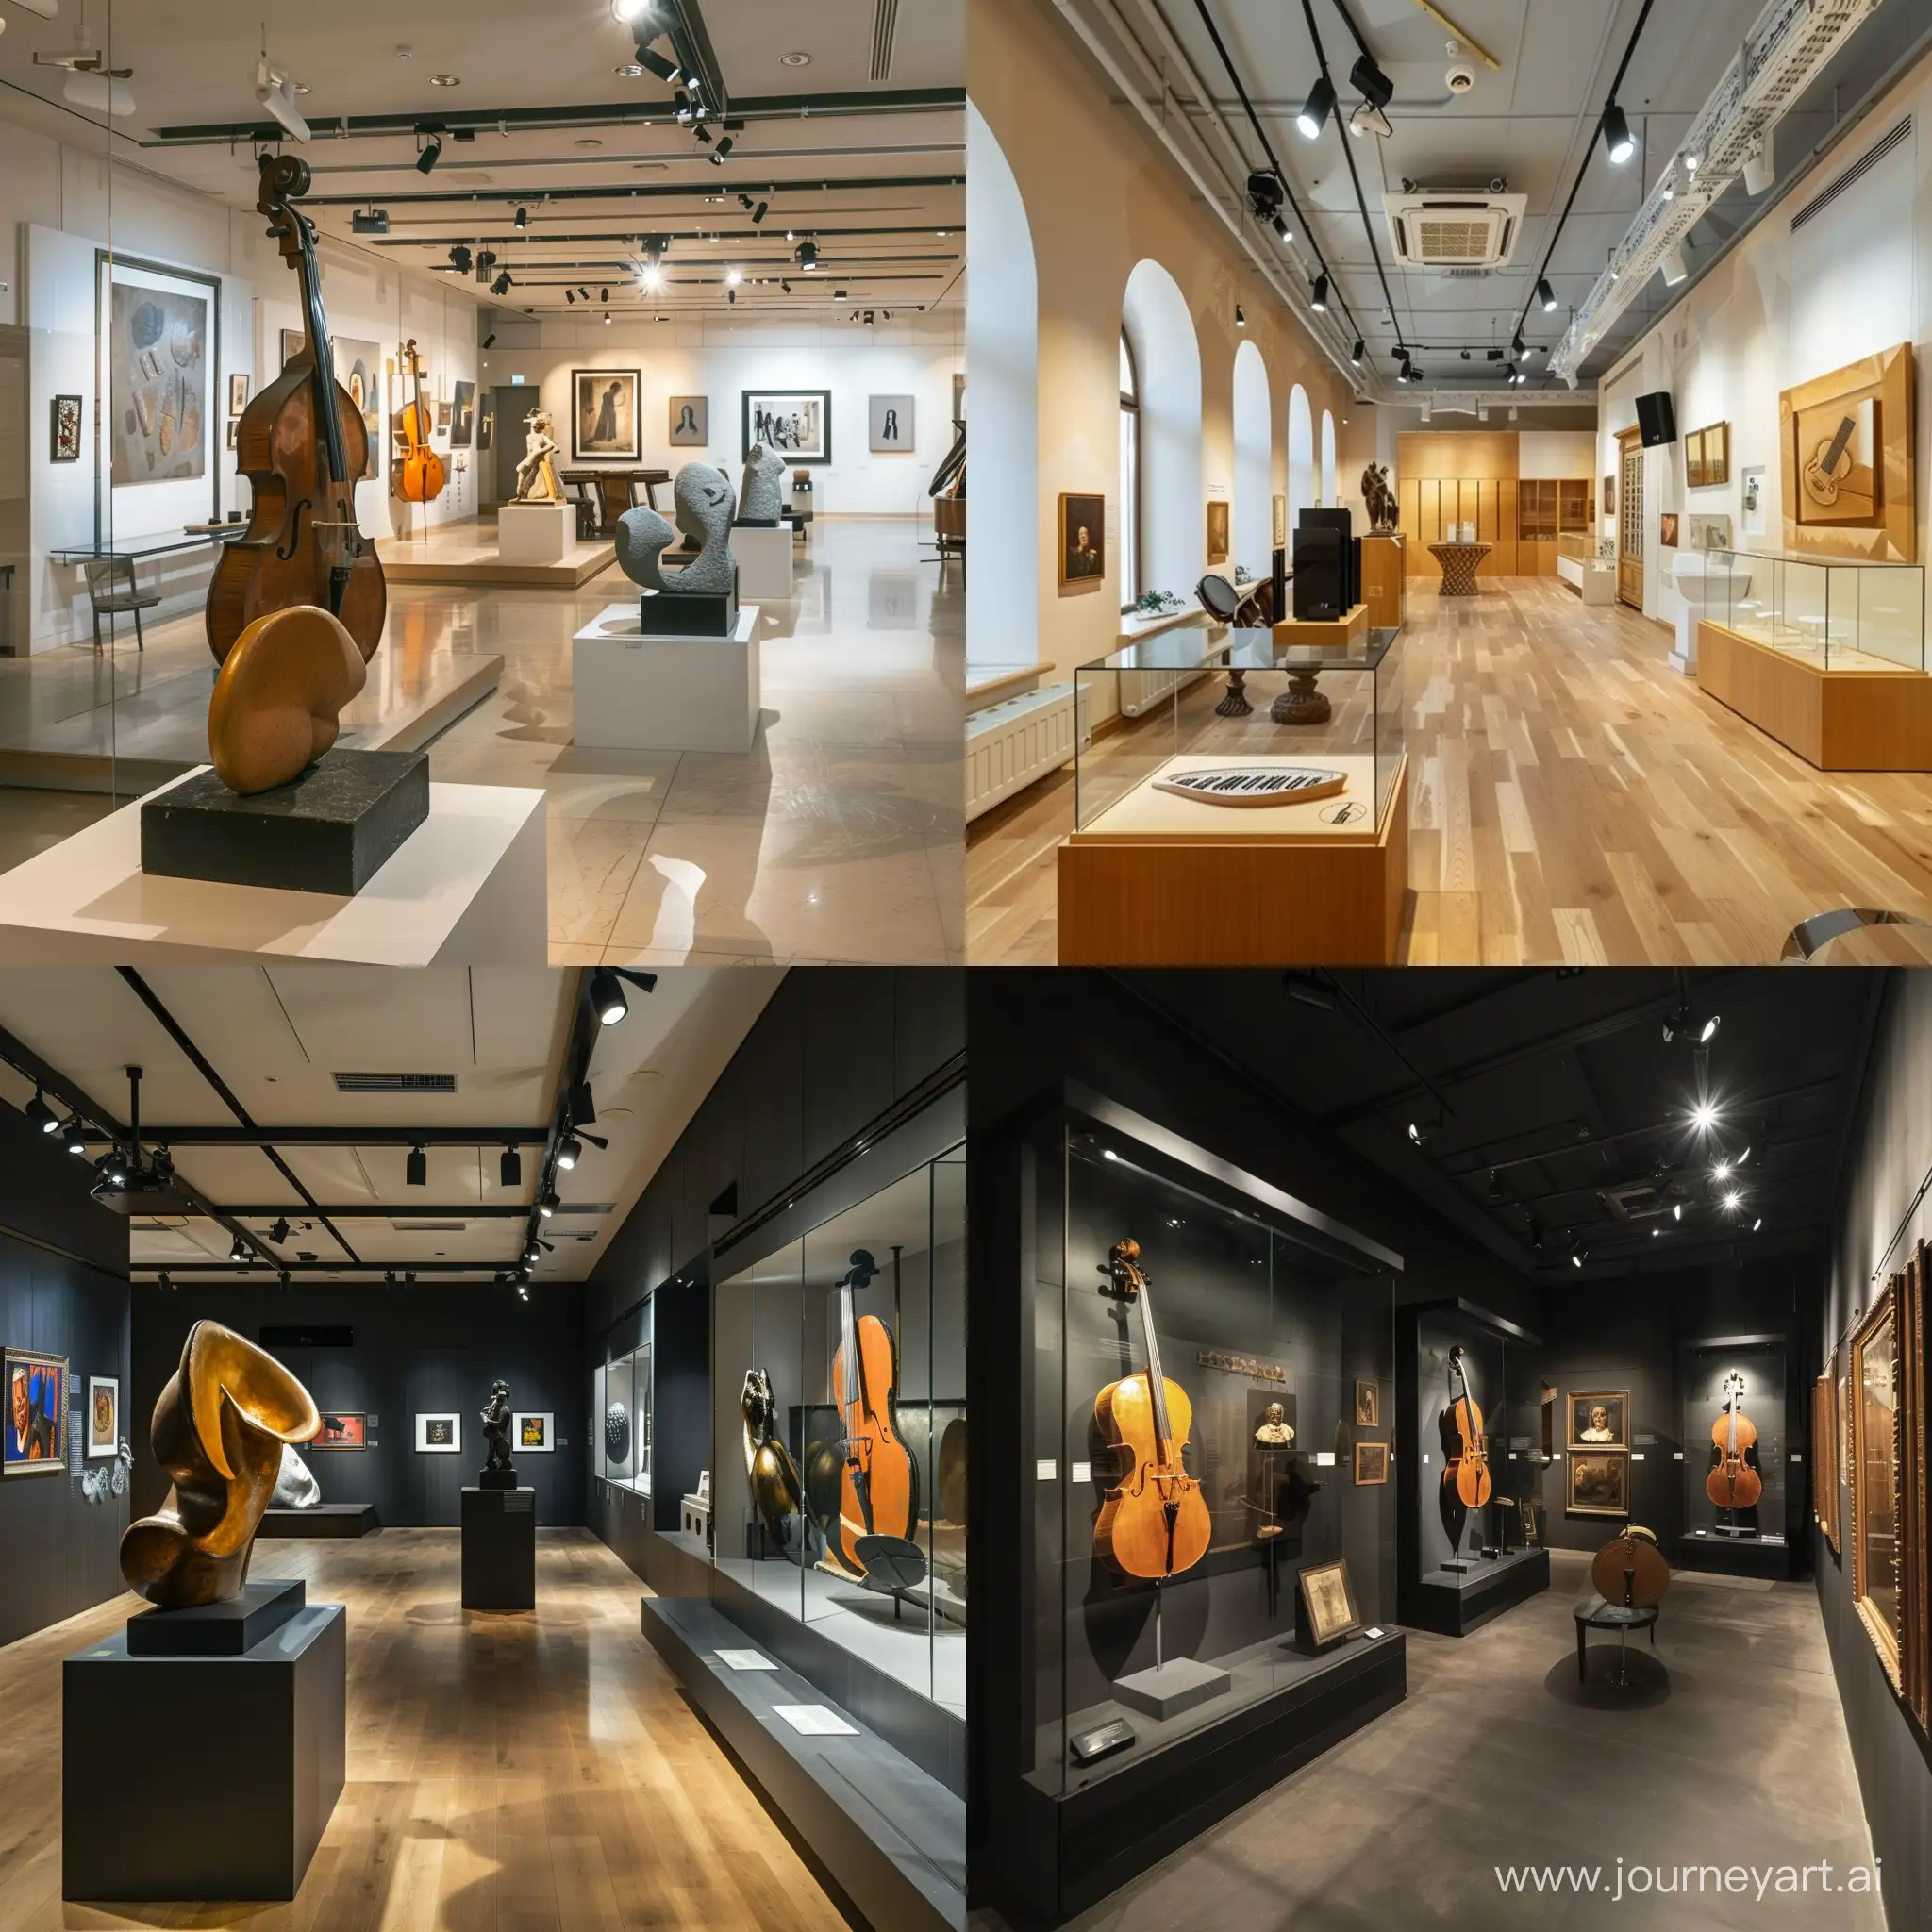 Contemporary-Musical-Art-Exhibition-with-Classical-Flair